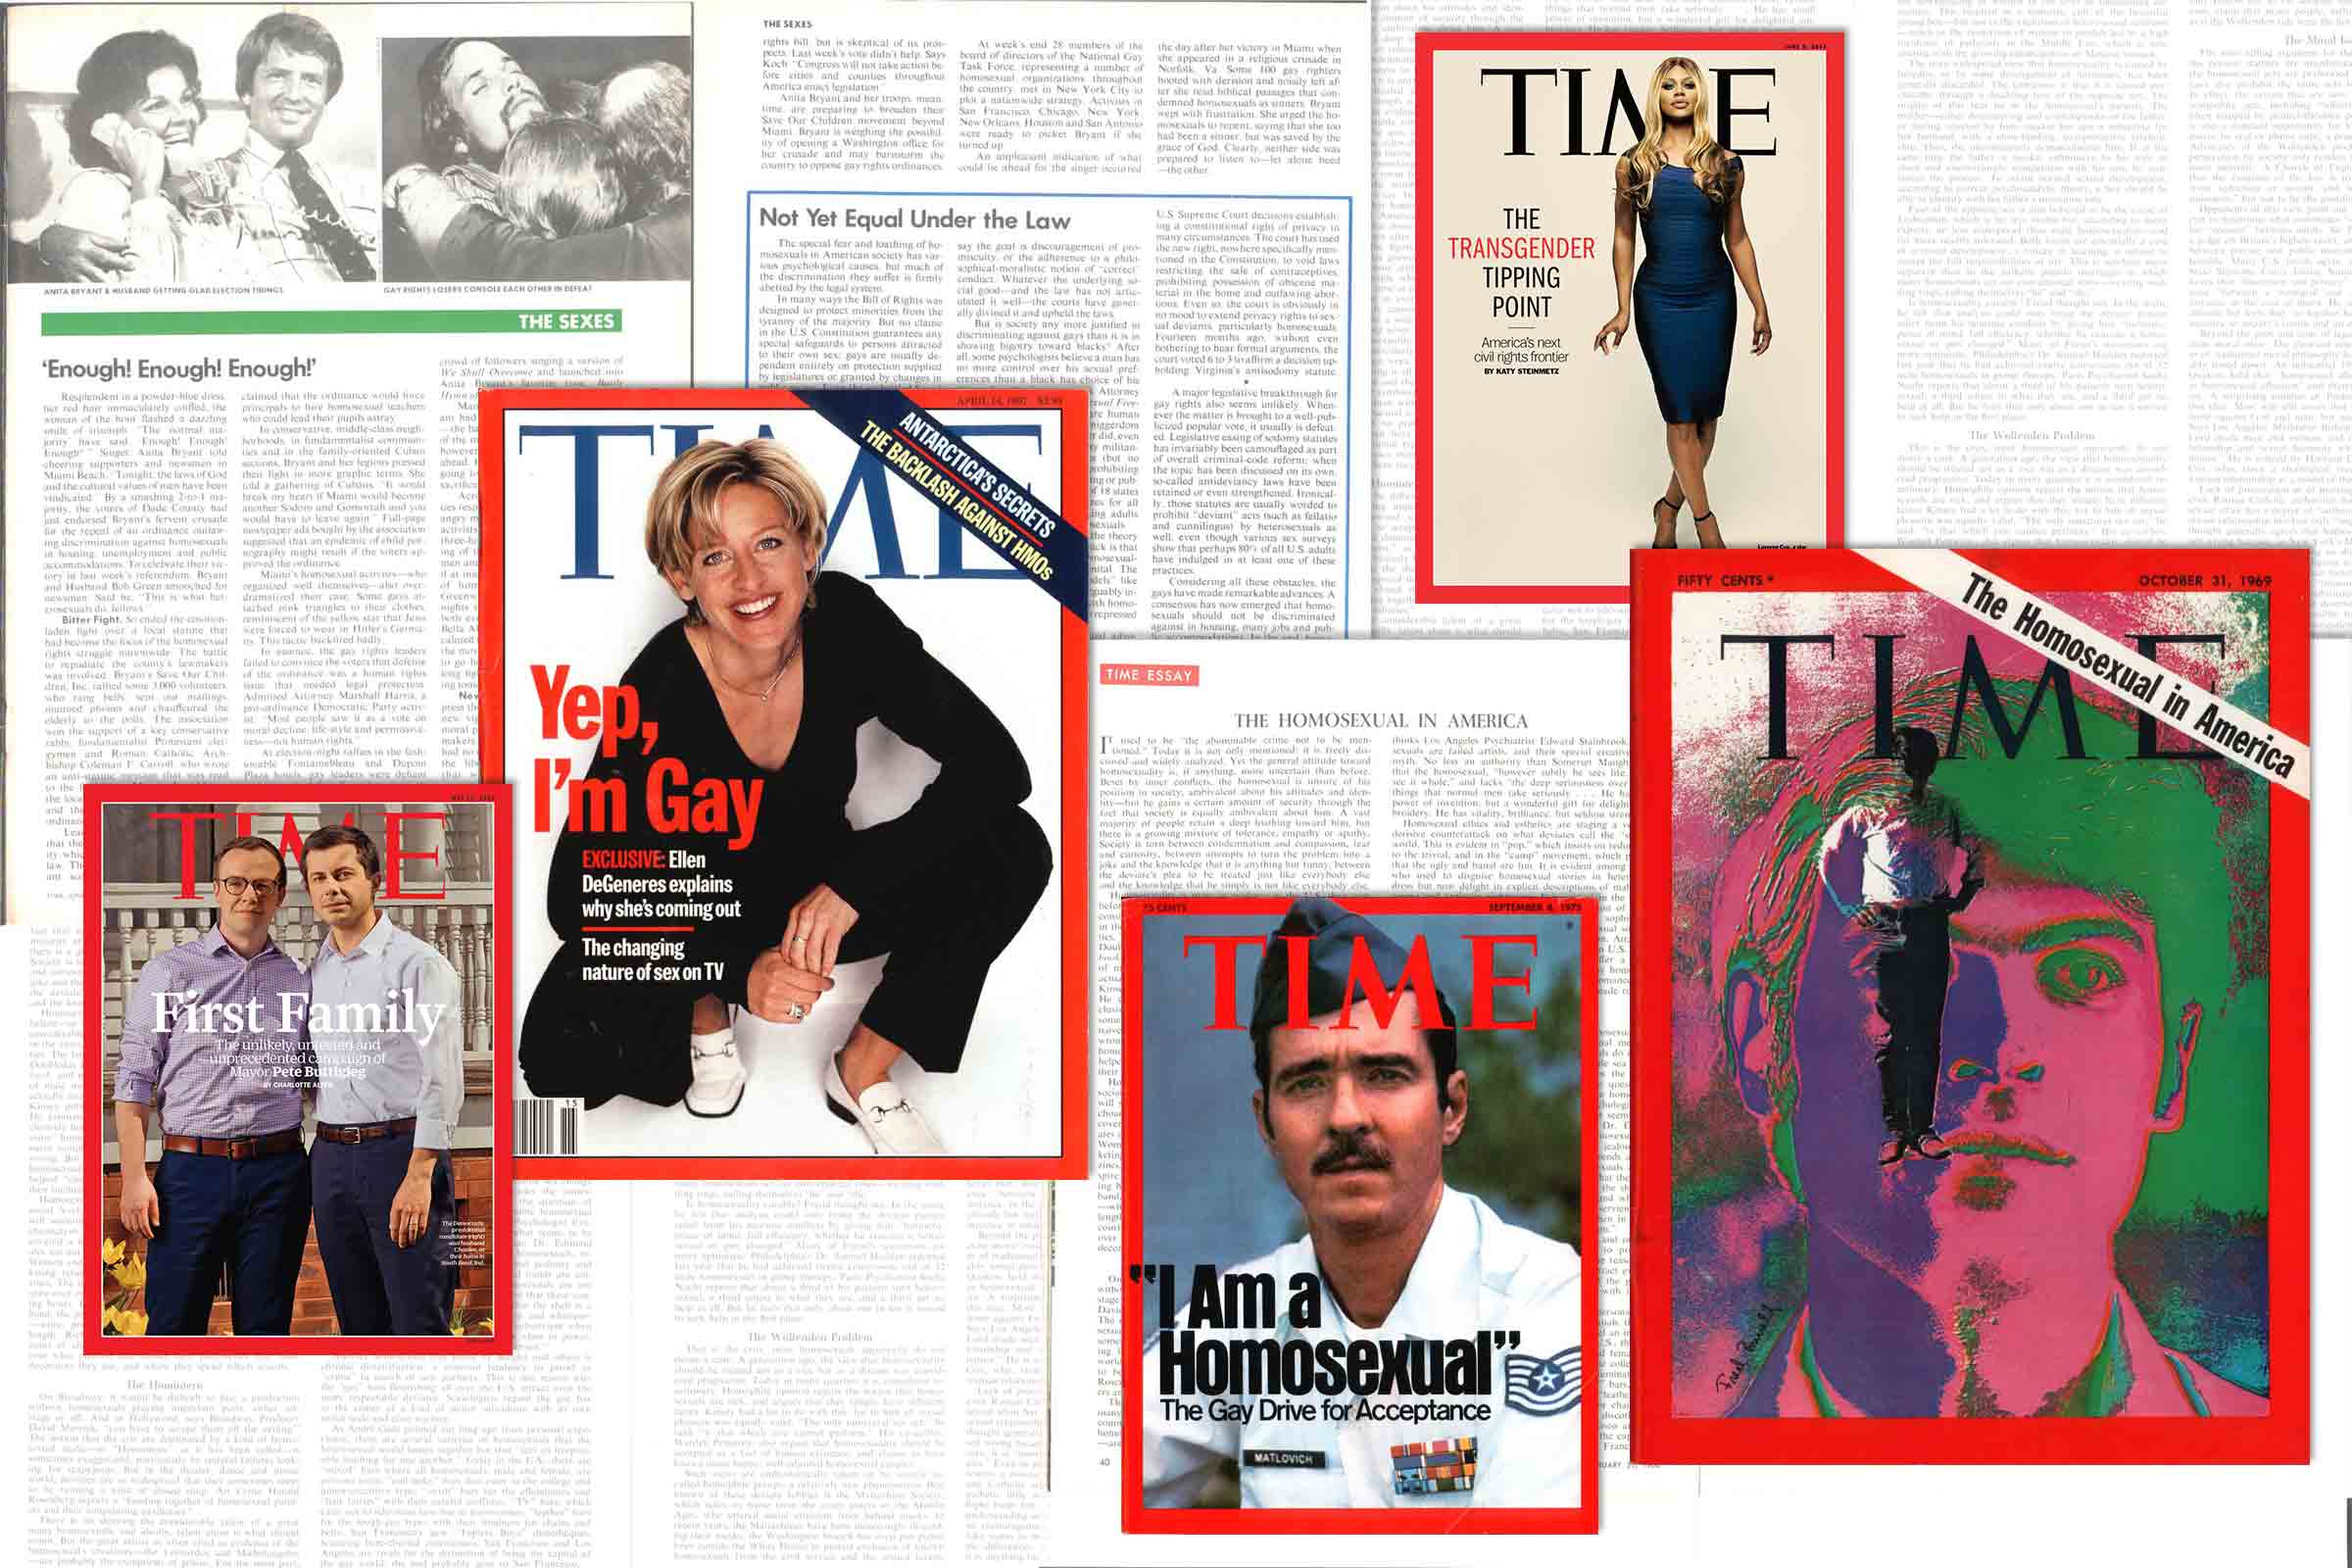 LGBTQ issues on the cover of TIME in (L-R) 2019, 1997, 1975, 2014 and 1969 (TIME)